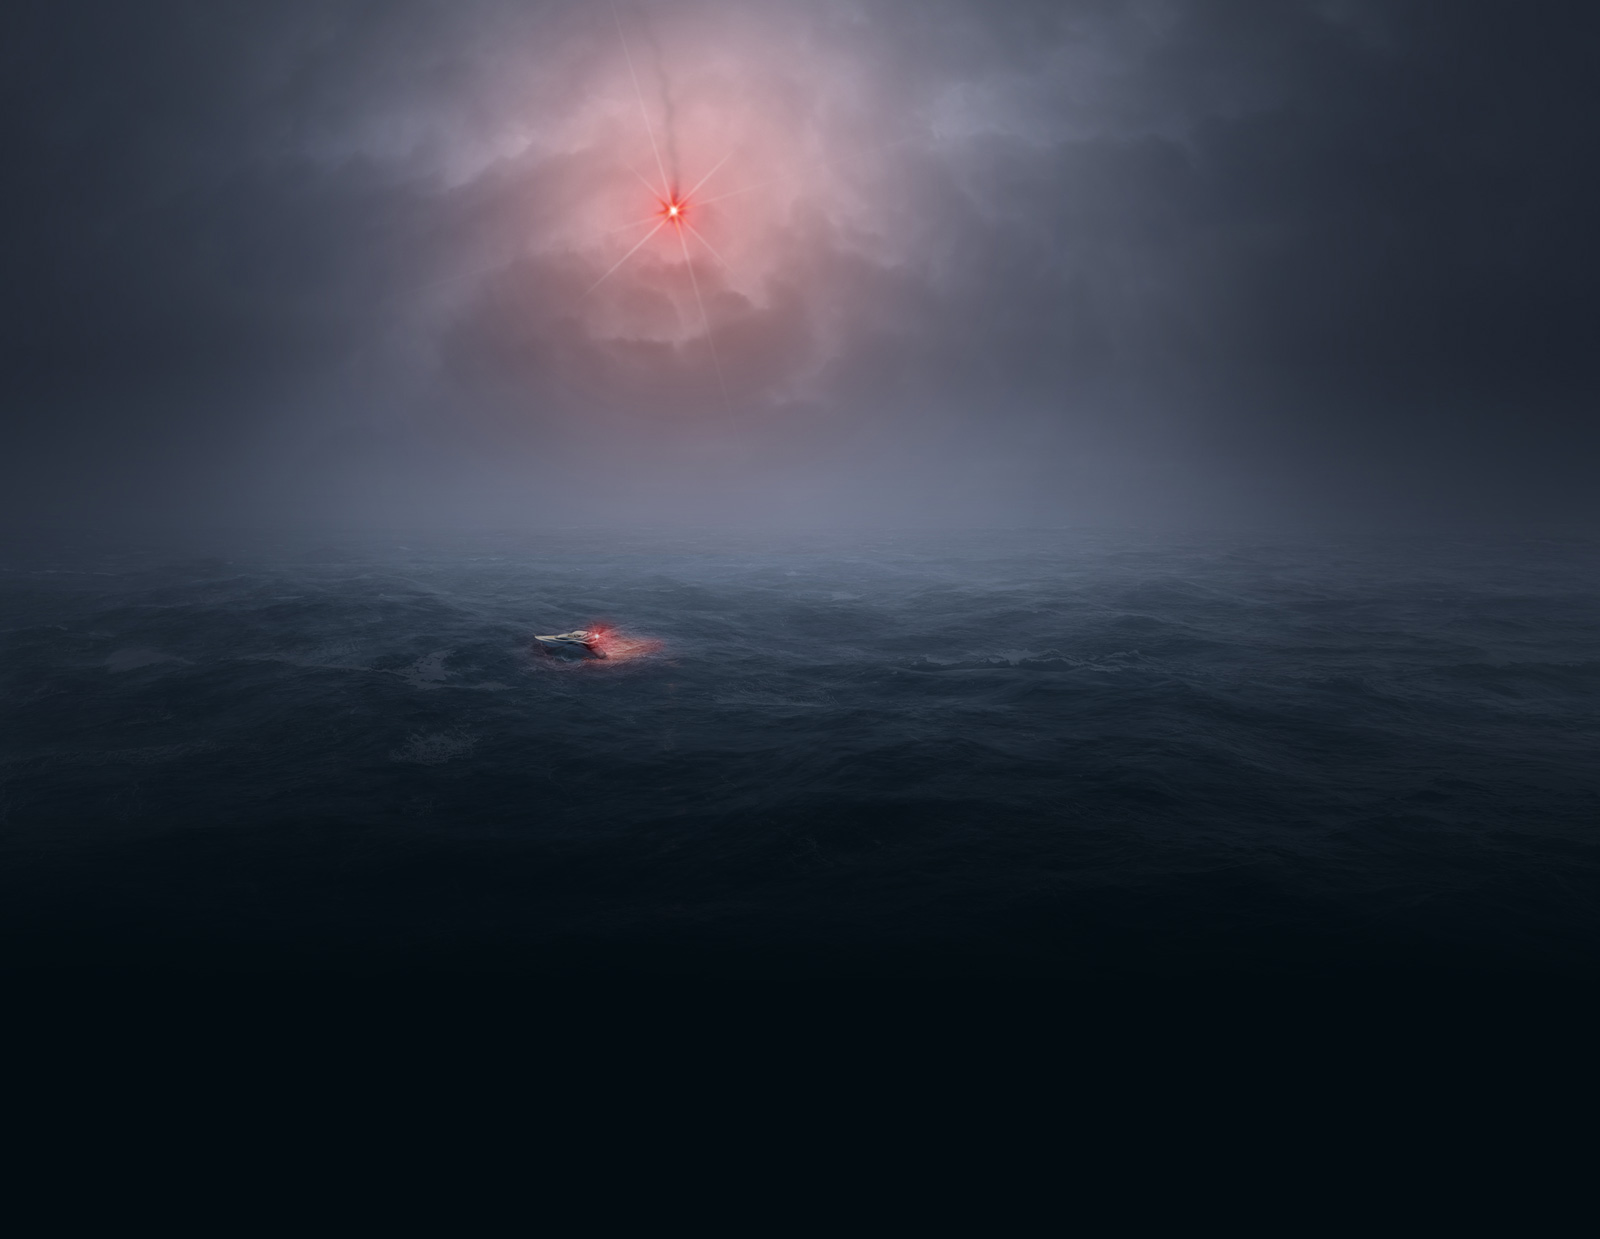 A lonely leisure boat on a stormy sea can be seen in the distance. It's dark outside. One of IKAROS products, the red parachute rocket, lights the sky over boat. A red handheld flare is held by a man on the boat. The two red distress signals lights up the dark.